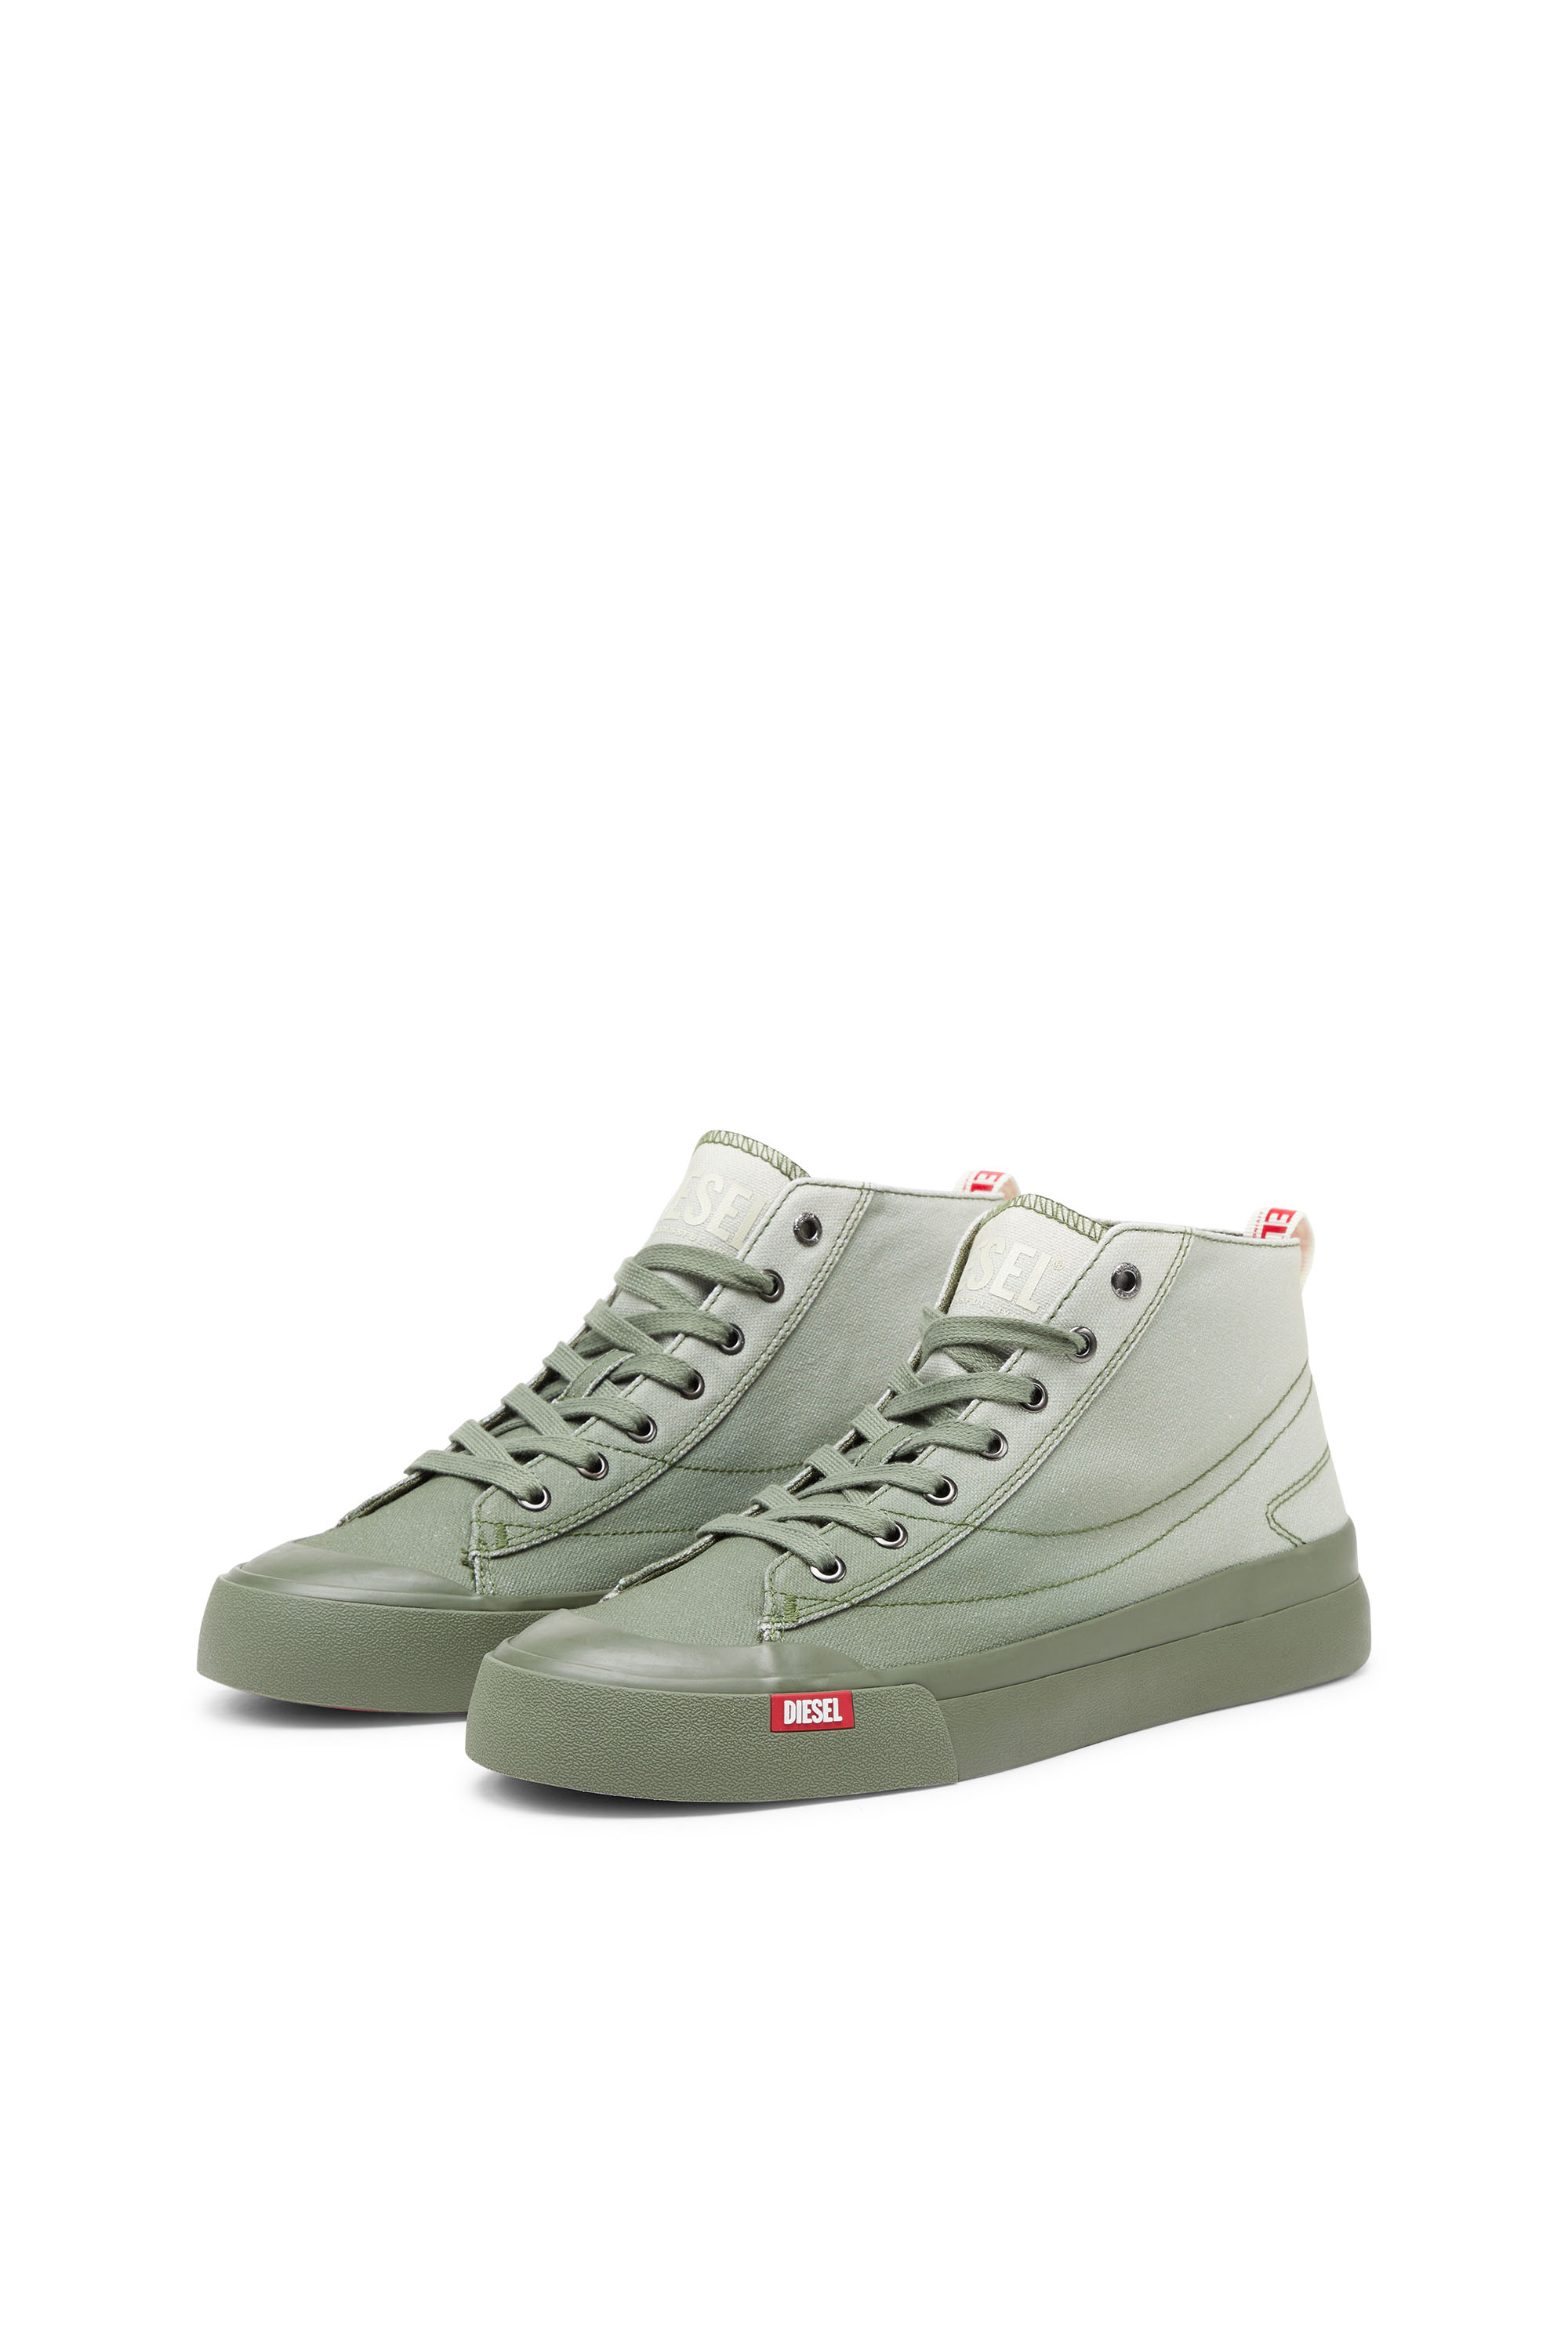 Diesel - S-ATHOS MID, Man S-Athos Mid-High-top sneakers in faded canvas in Multicolor - Image 8